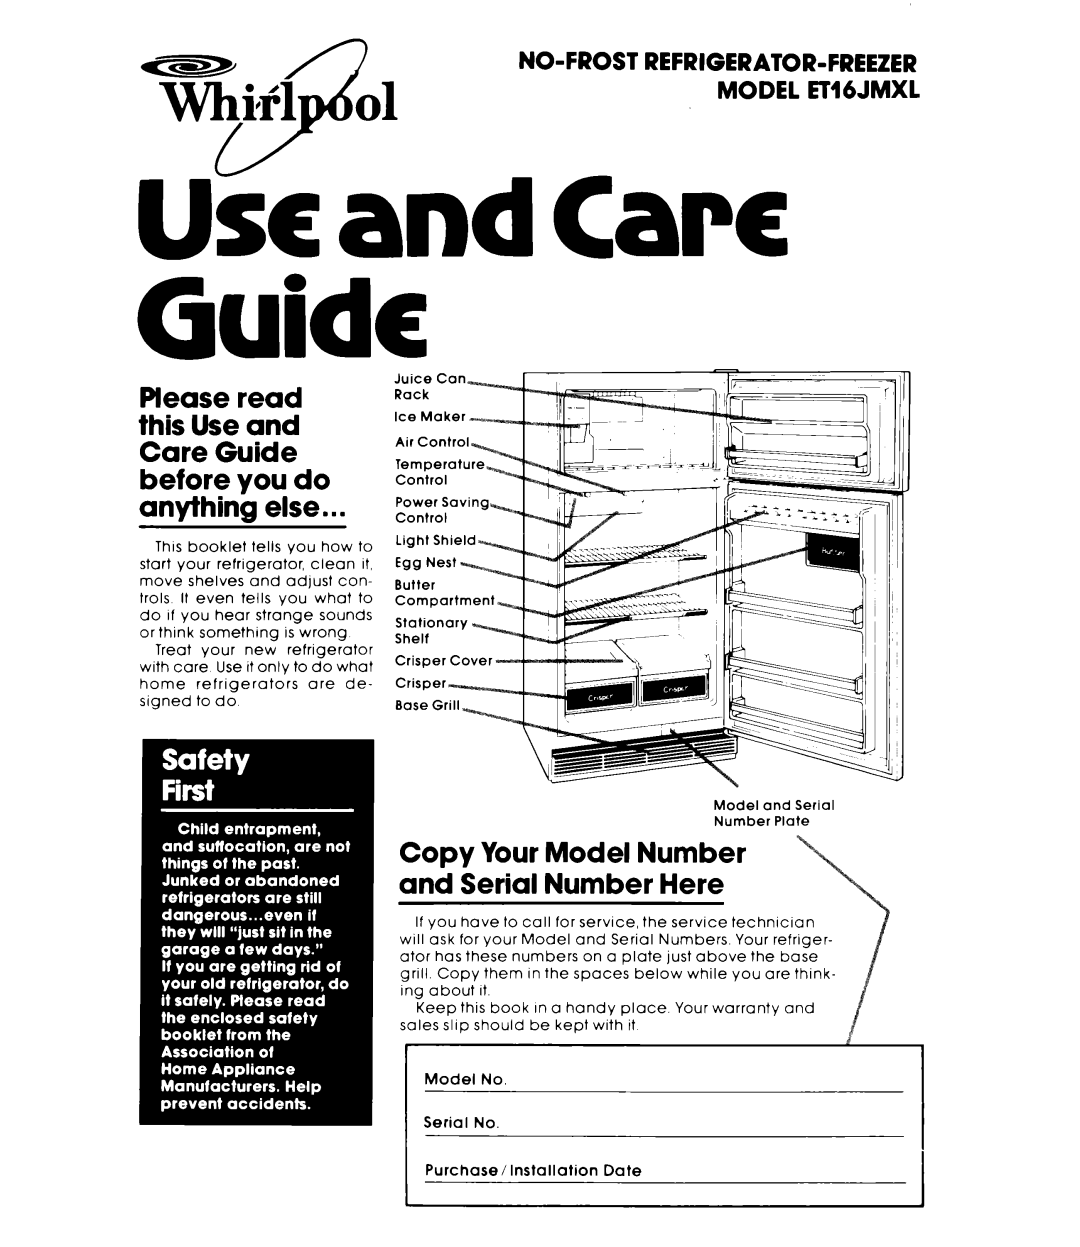 Whirlpool warranty Copy Your Model Number and Serial Number Here, Uk and Care Guide, MODEL ET16JMXL 